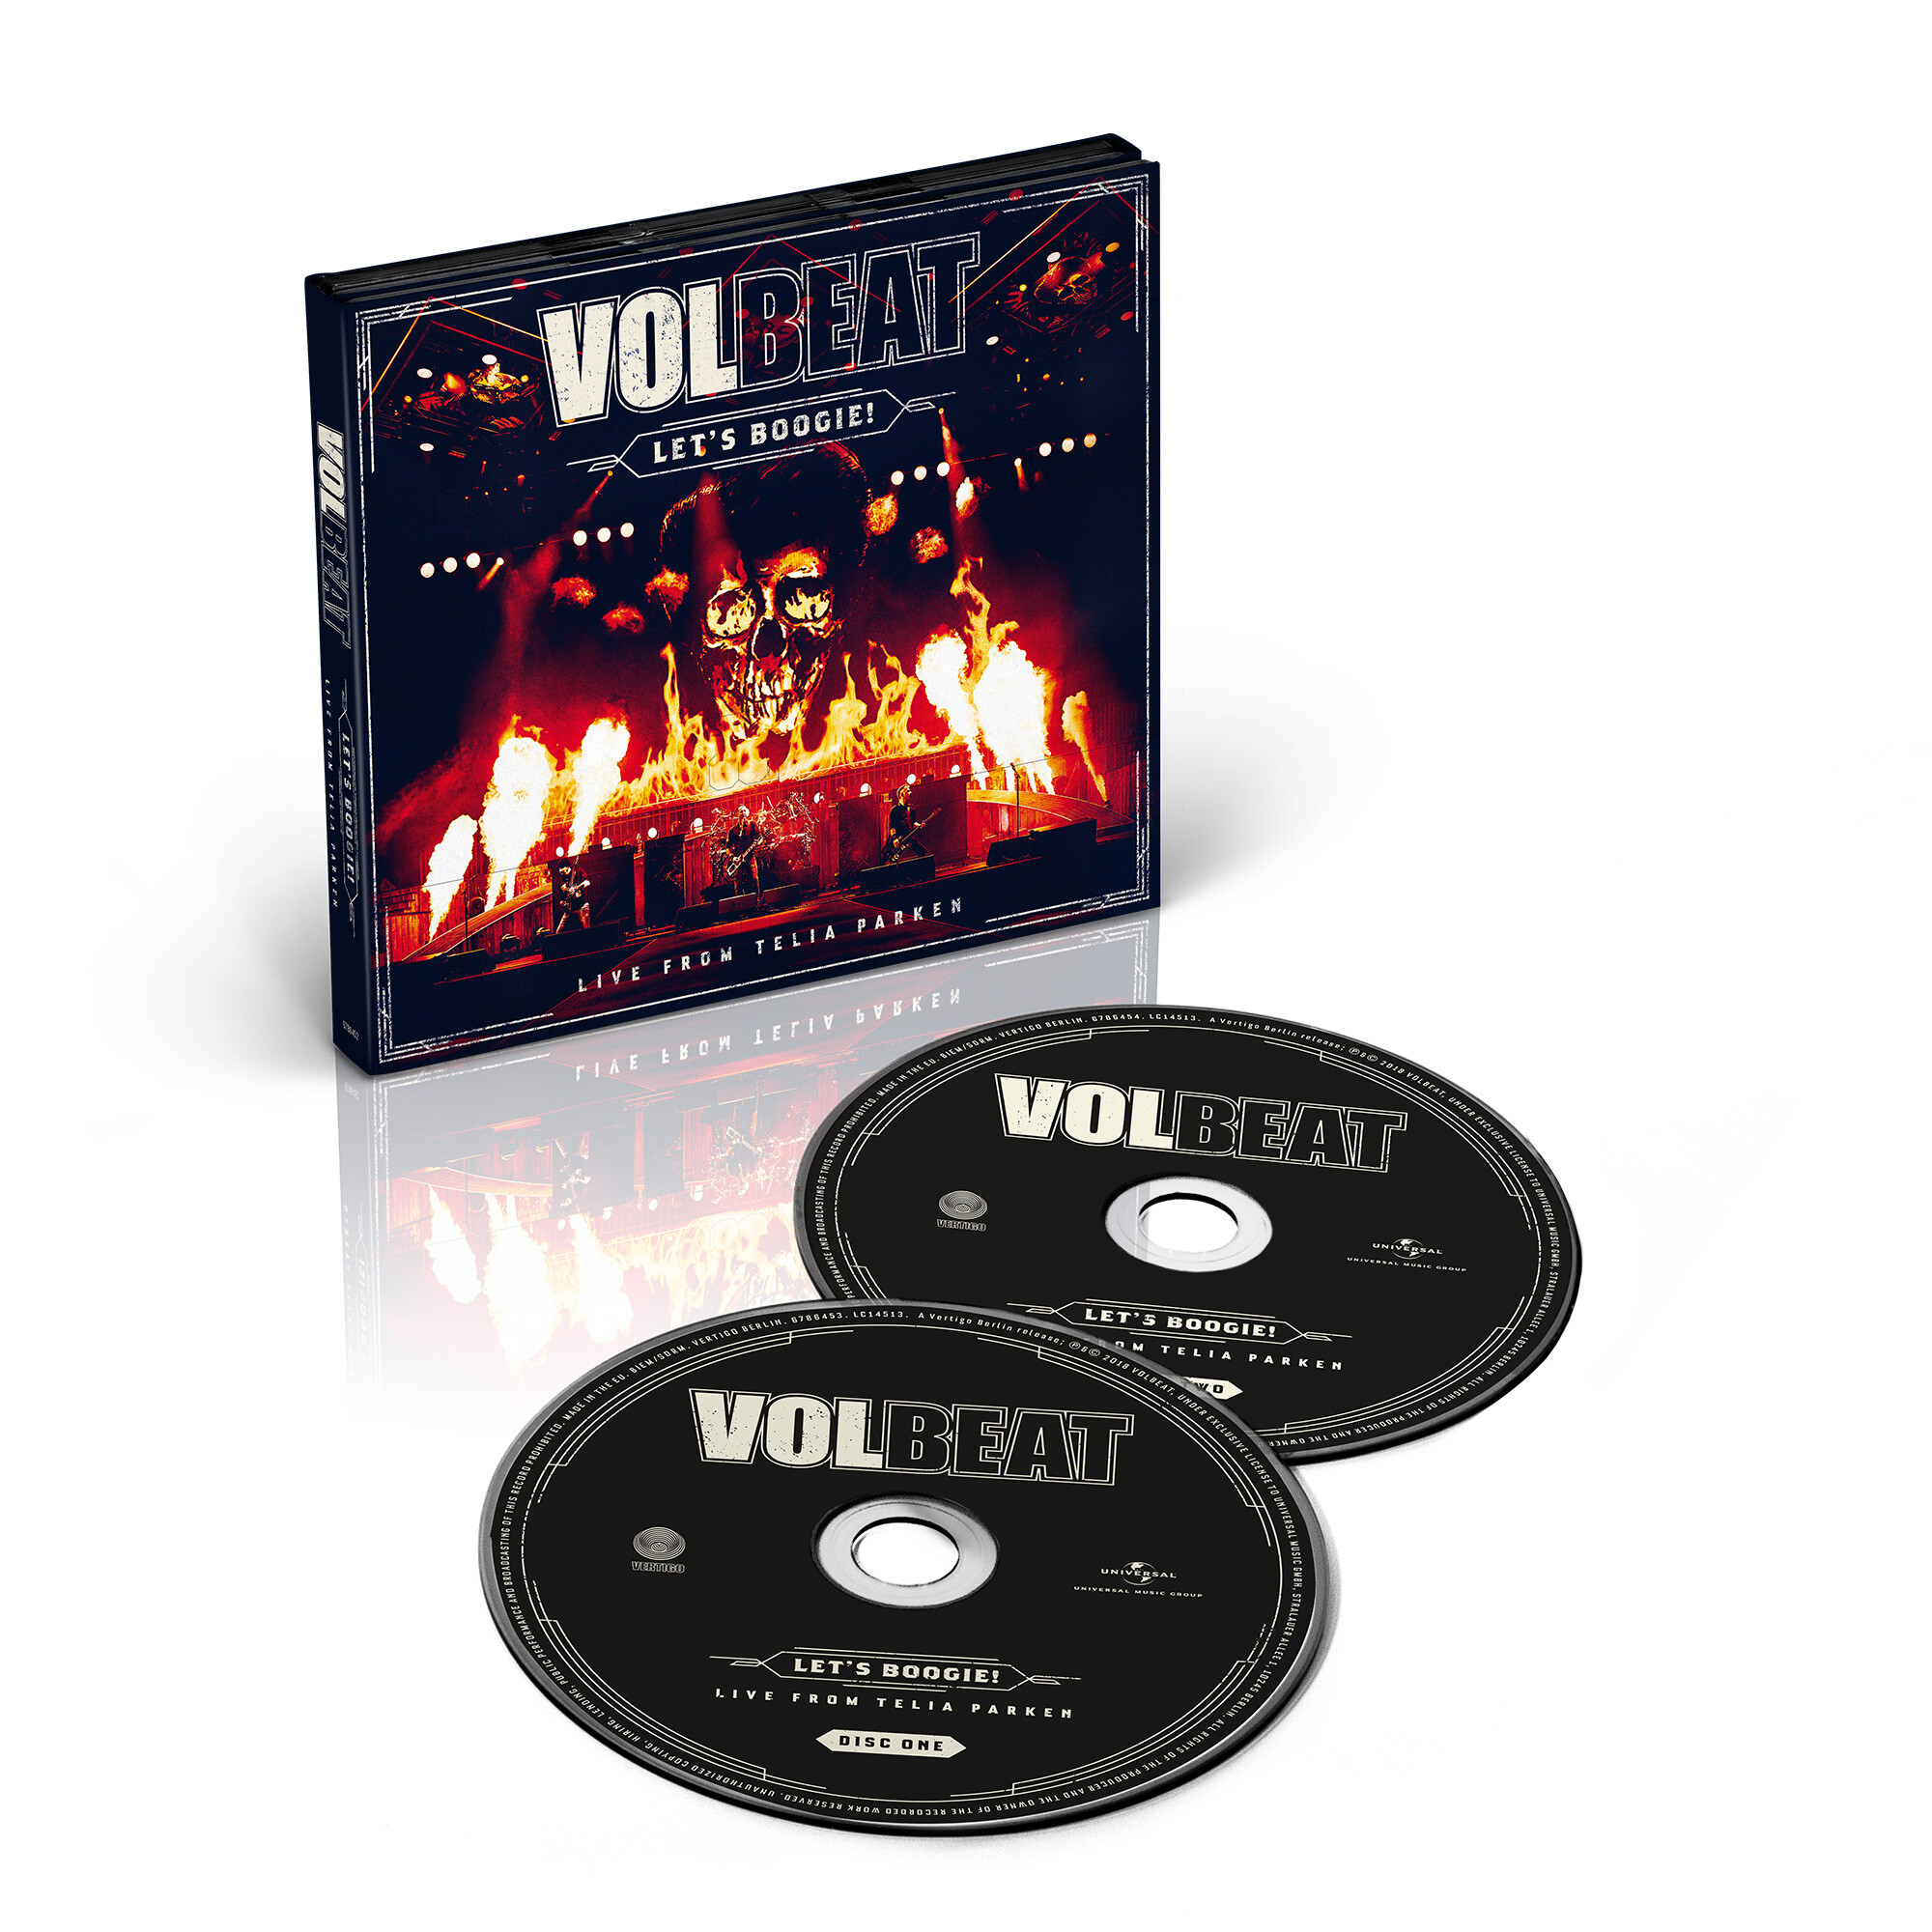 Volbeat Online Store Lets Boogie Live From Telia Parken 2cd